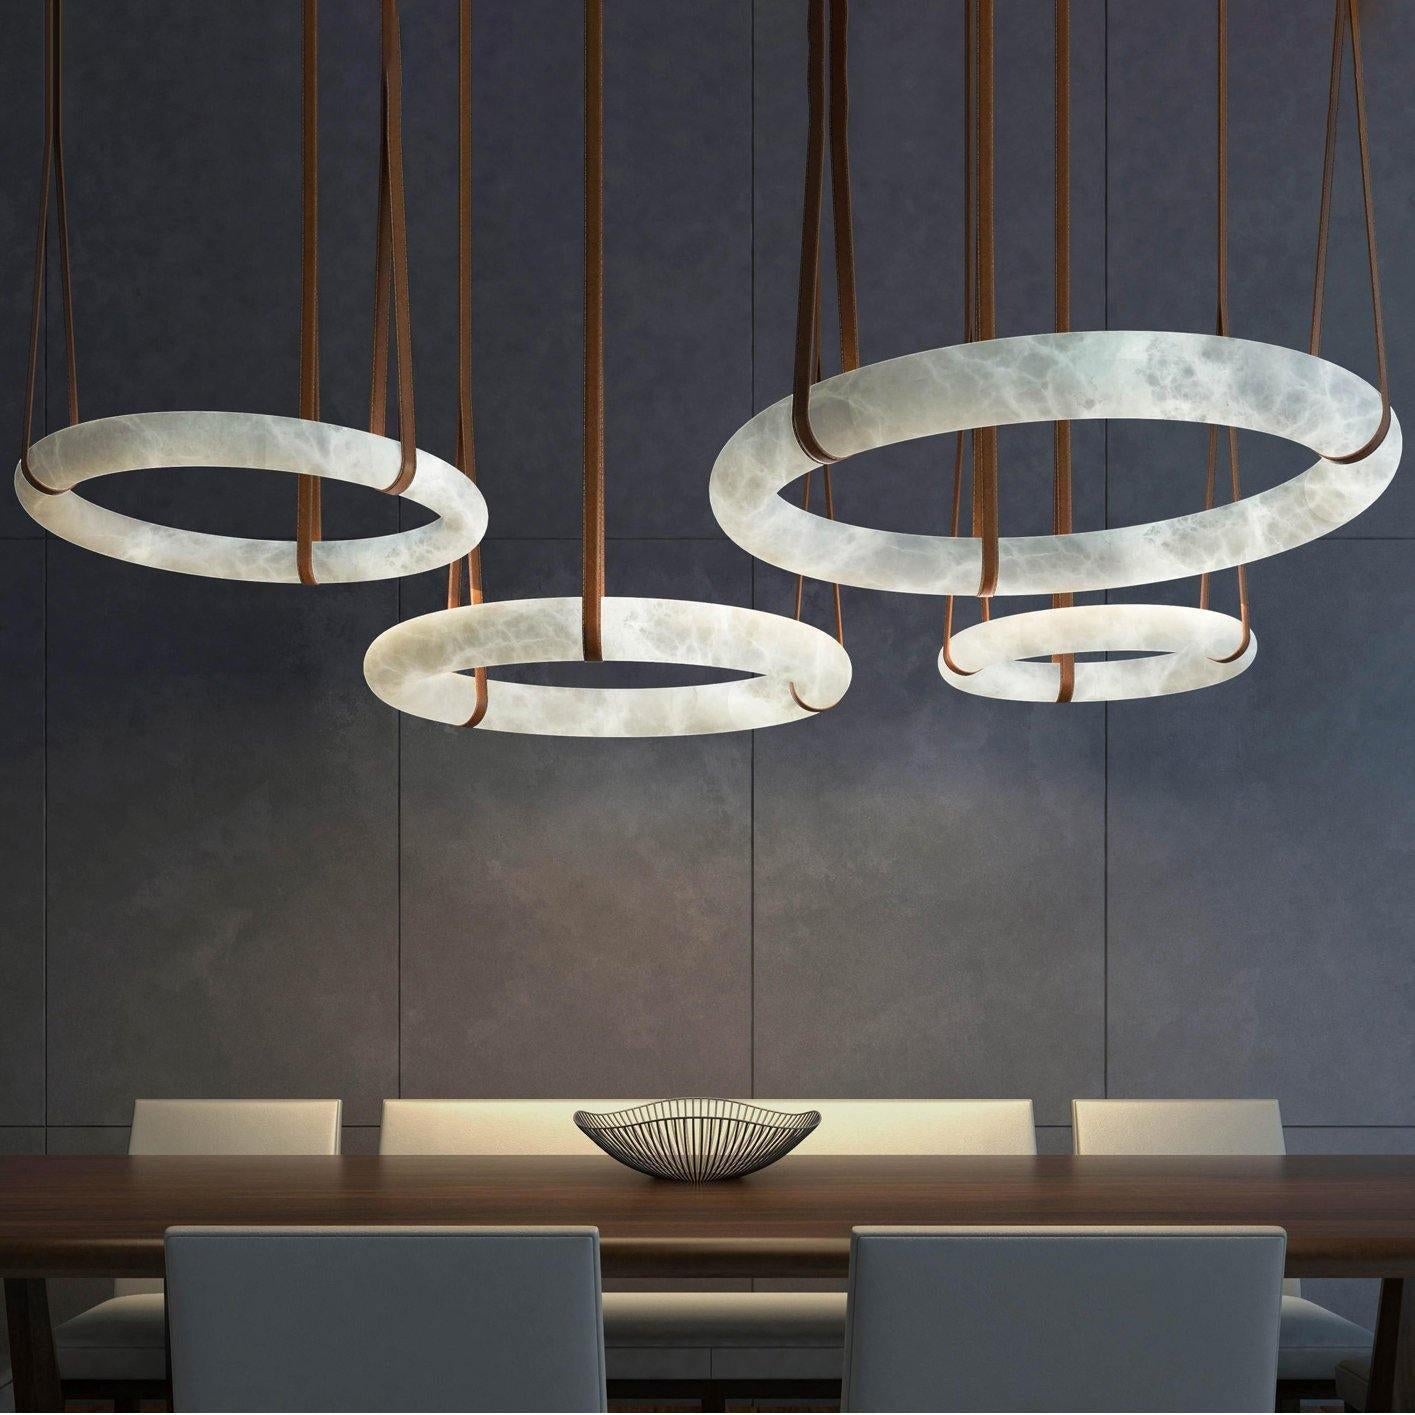 Oslo Pendant Alabaster Chandelier, Halo Ring Chandelier With Leather Chandelier Kevin Studio Inc 23.6" D Single Ring  